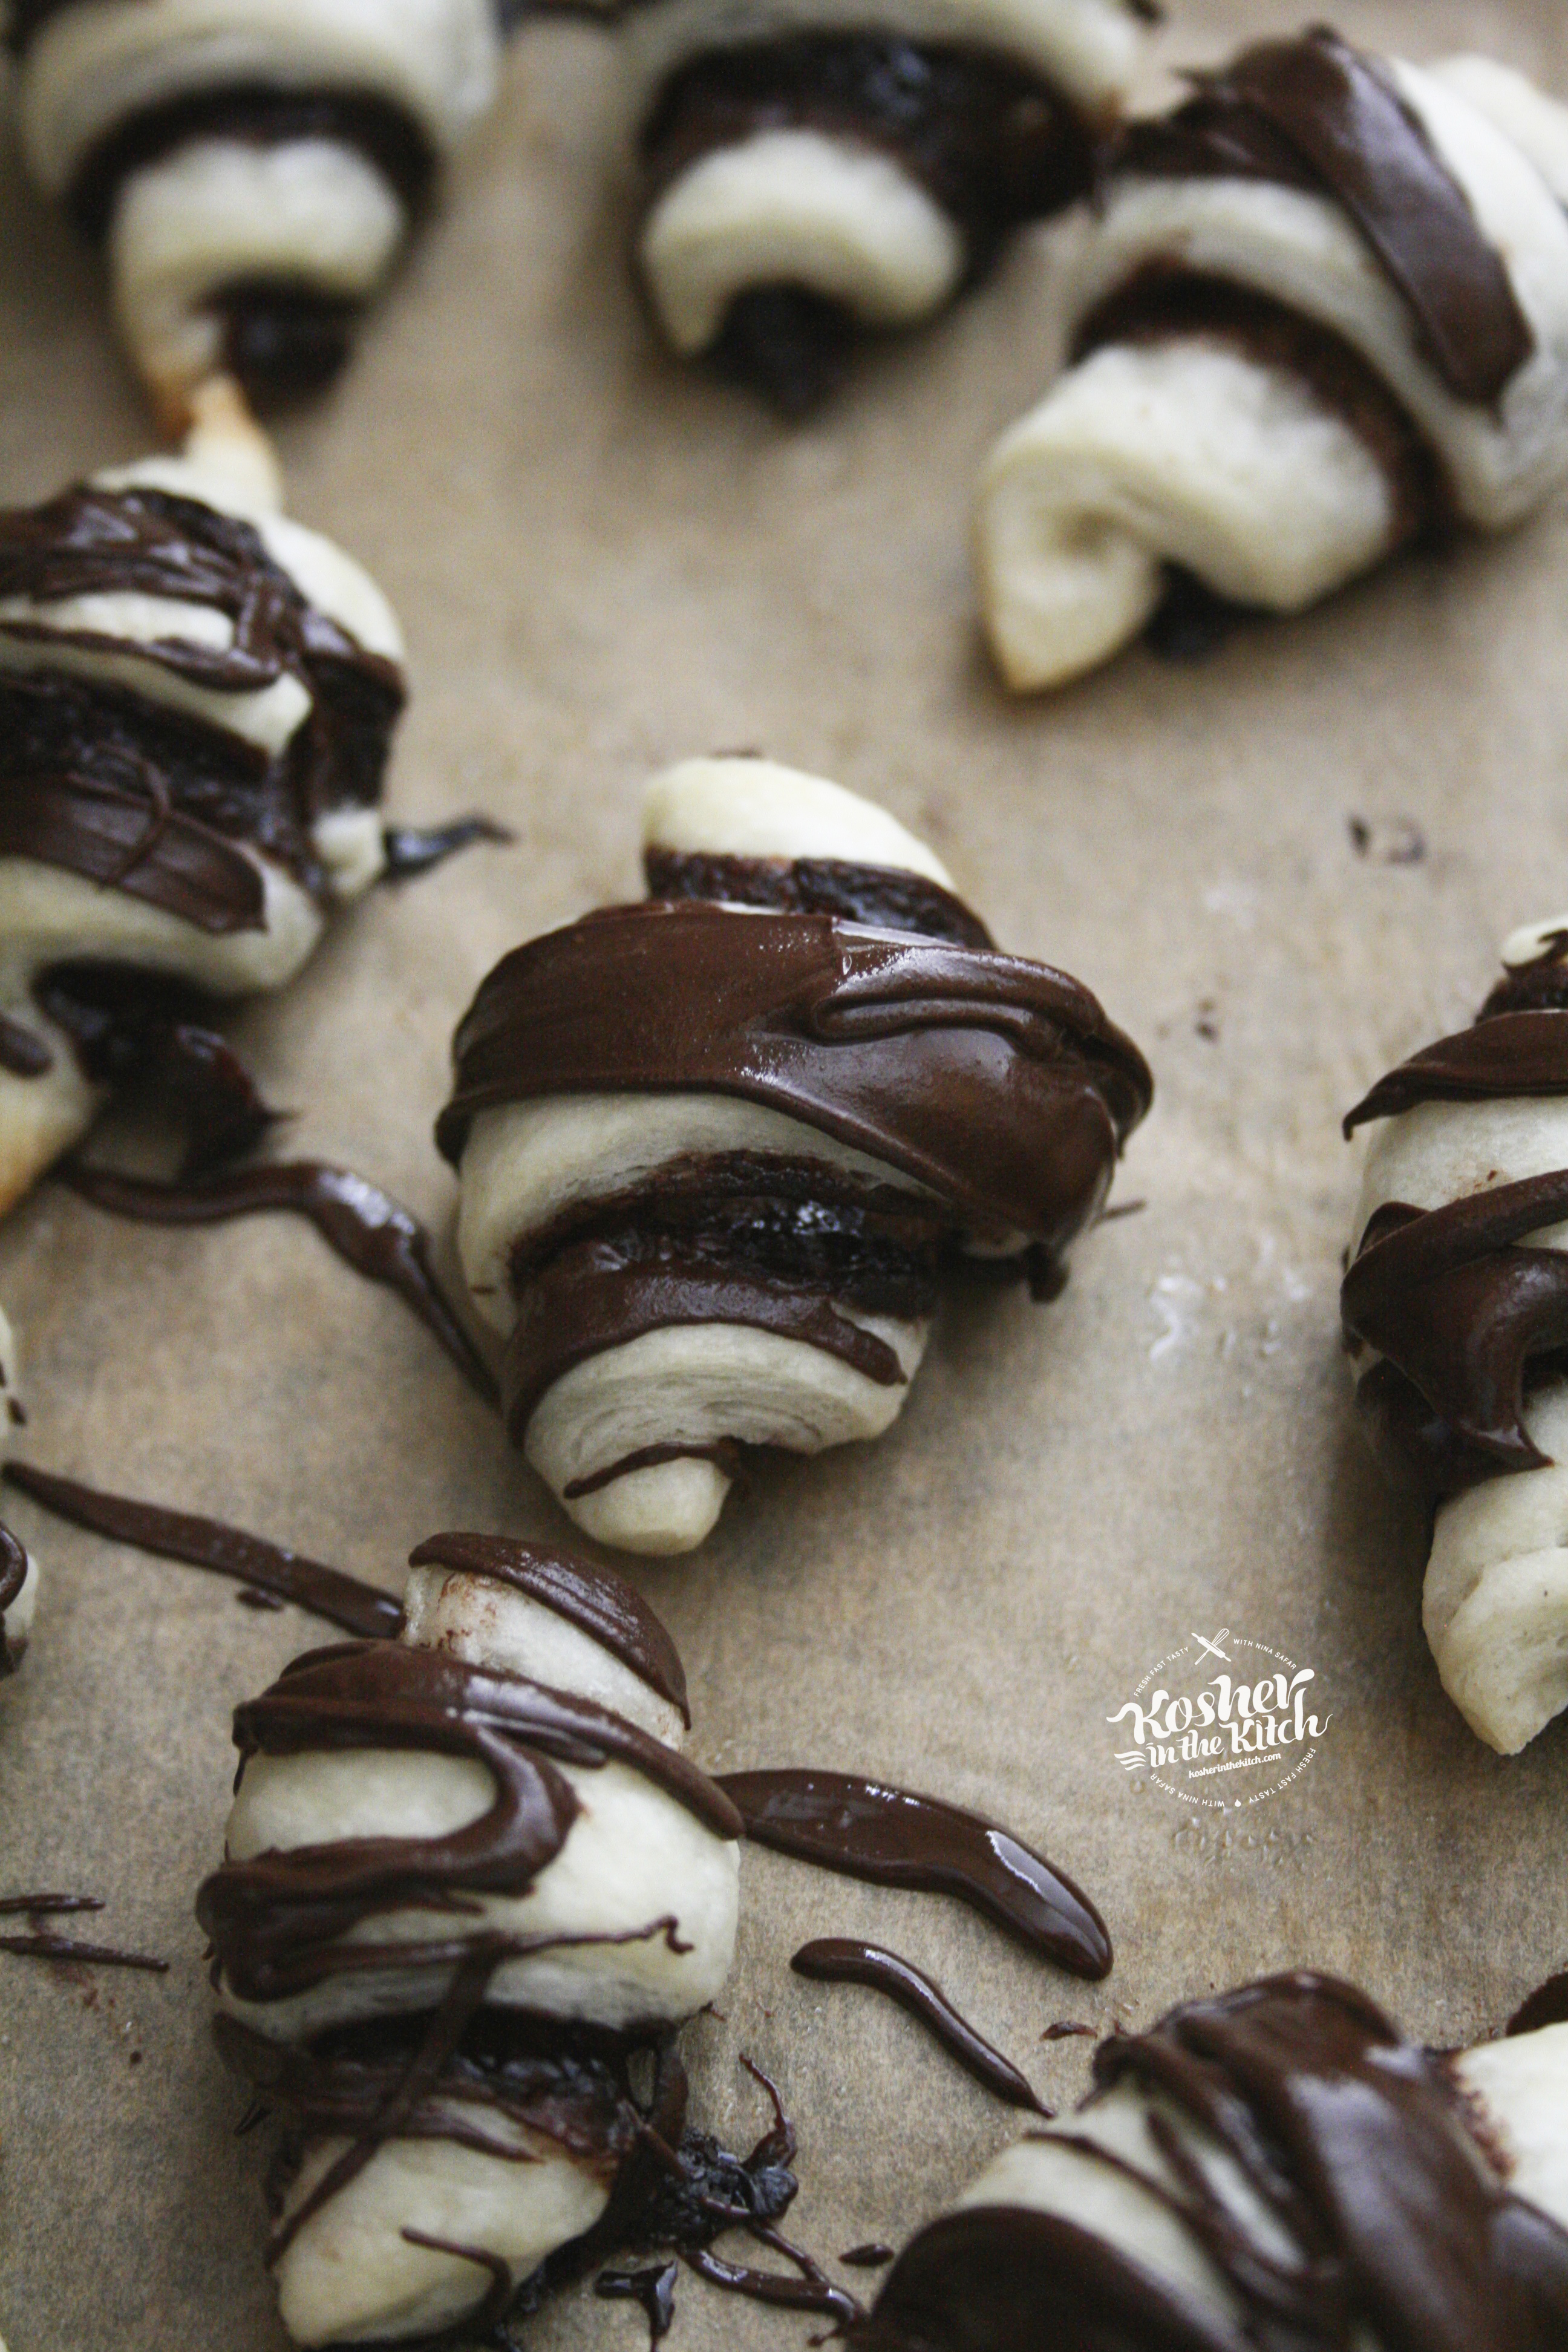 Chocolate Rugelach with Chocolate Drizzled on Top